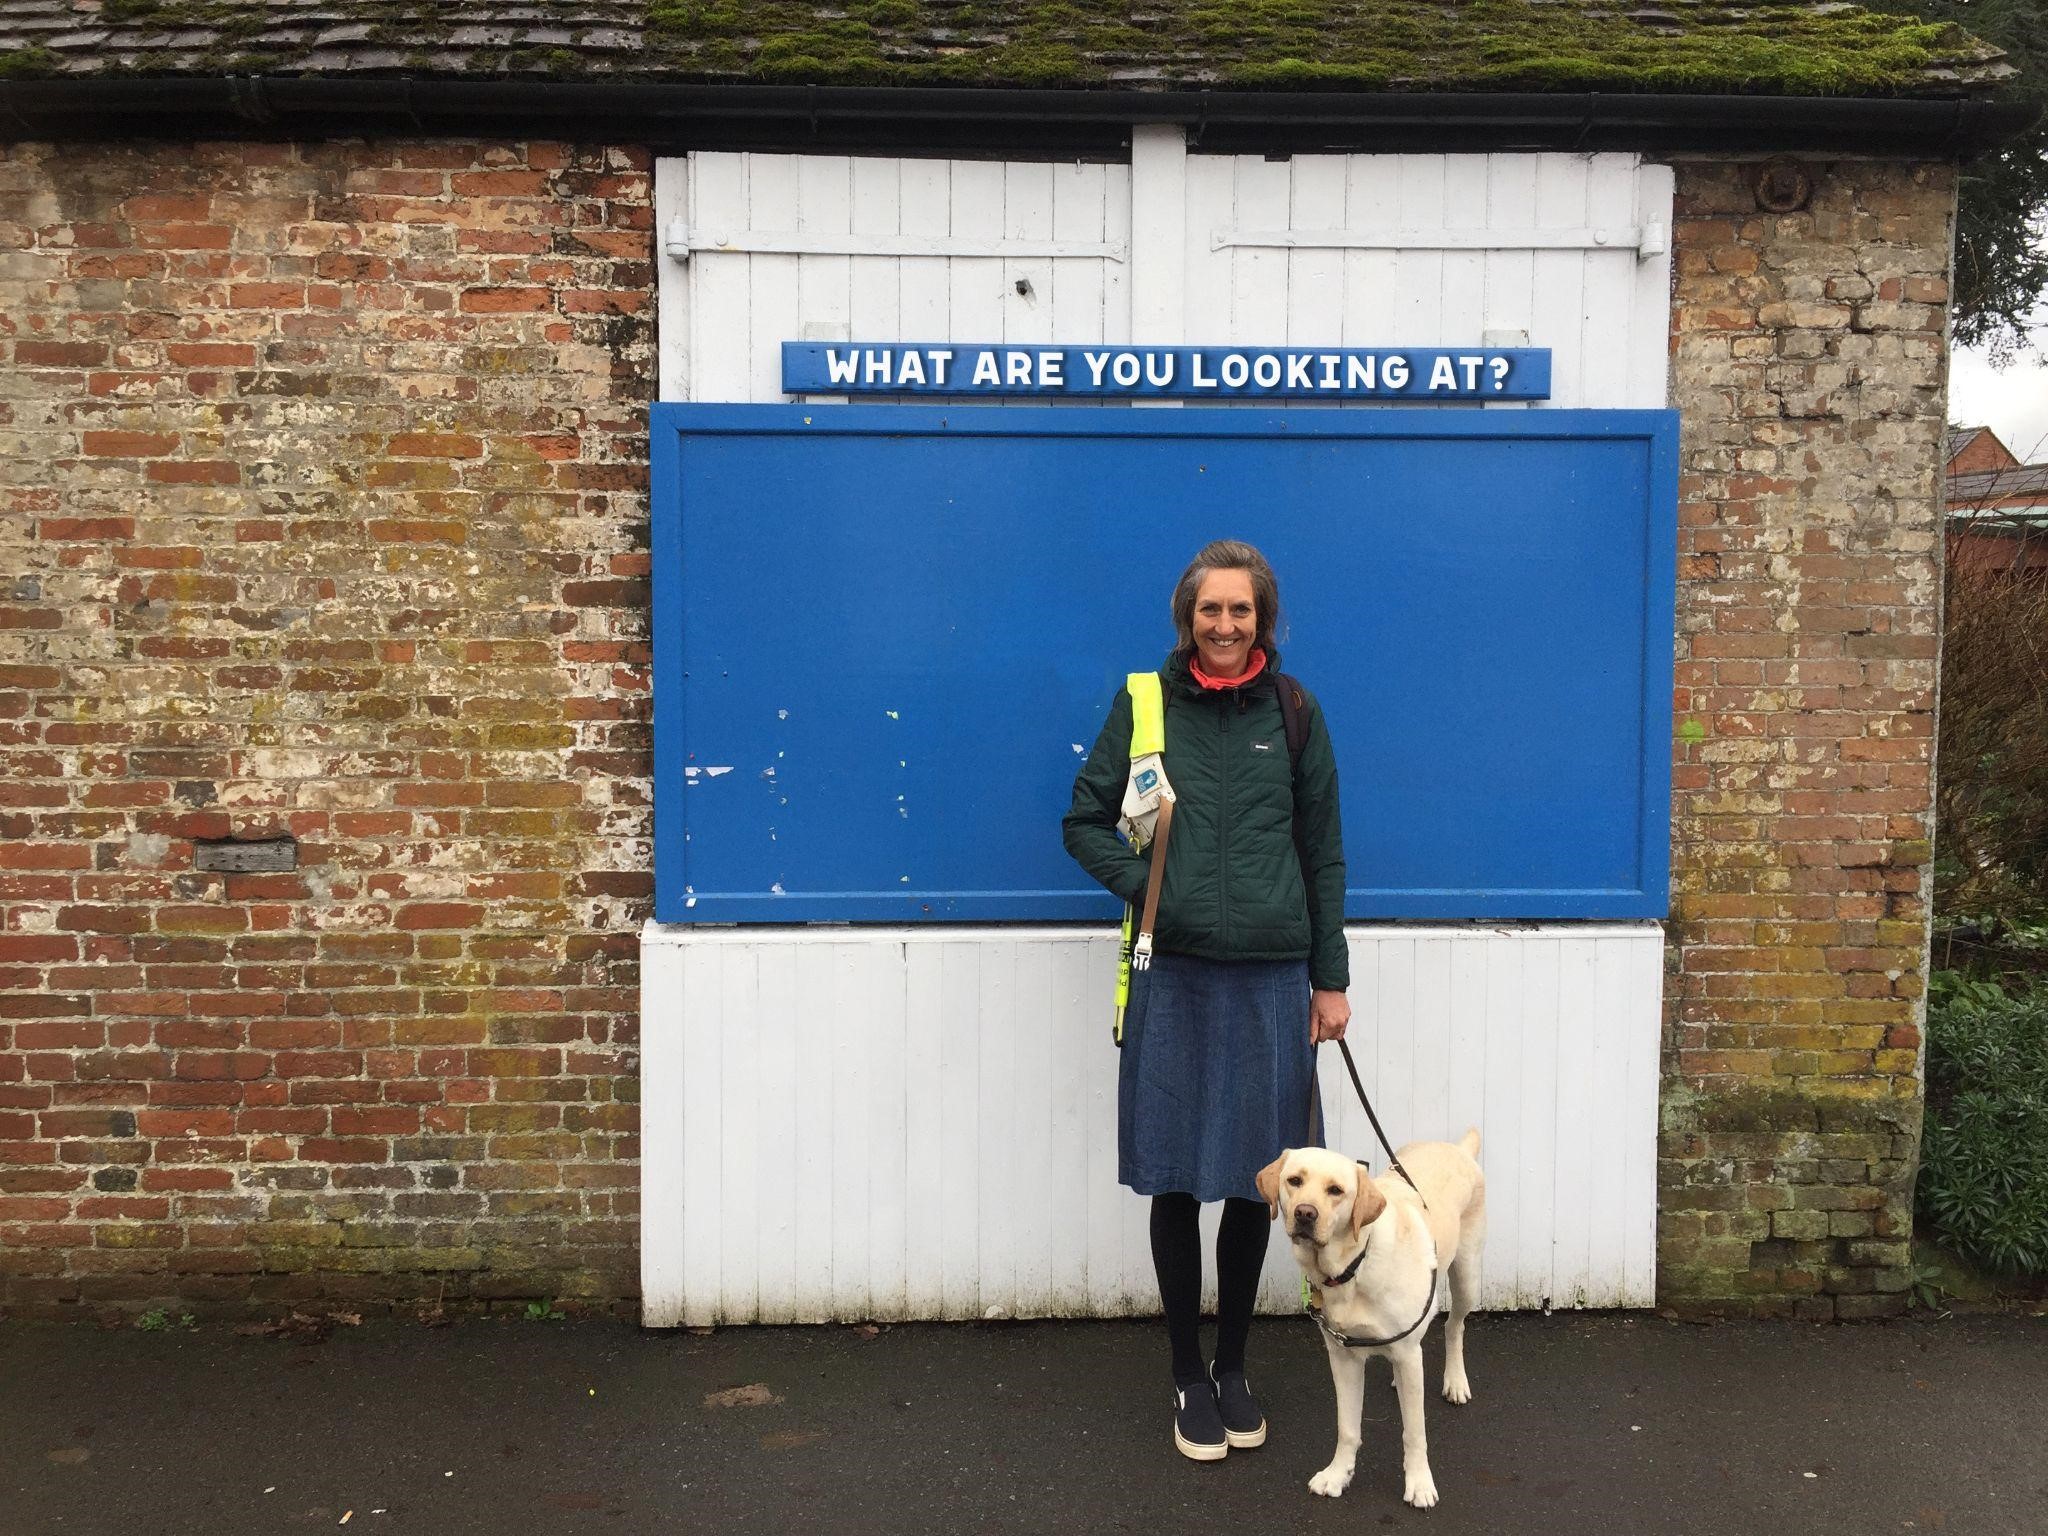 Angela Charles with guide dog (a golden Labrador) in front of a brick building with a blue & white door